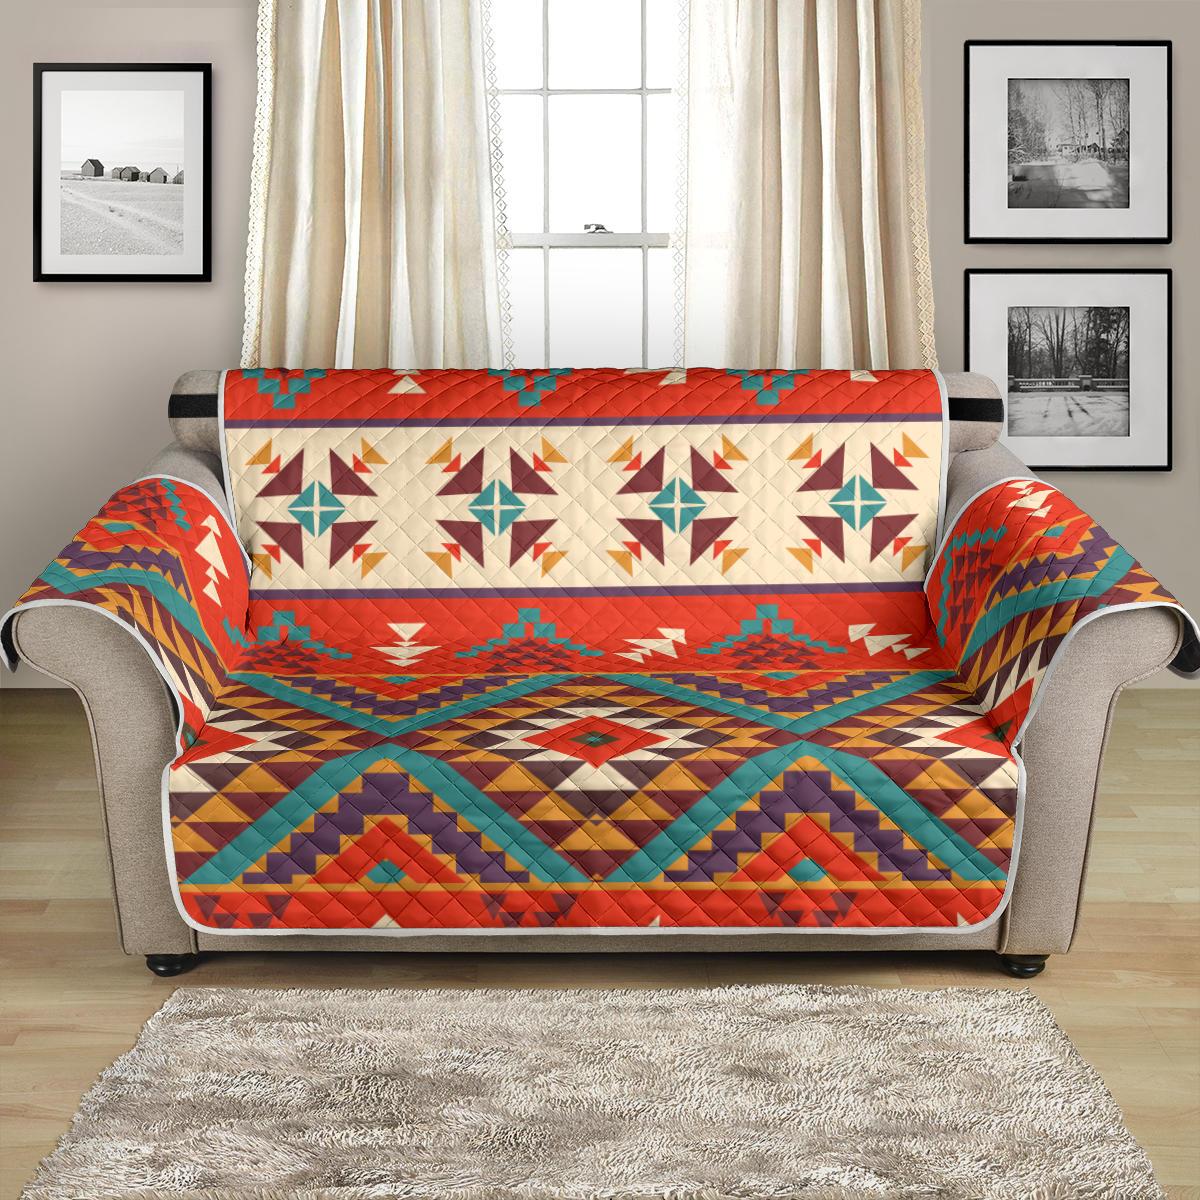 Aztec Red Print Pattern Loveseat Couch Cover Protector - JTAMIGO.COM